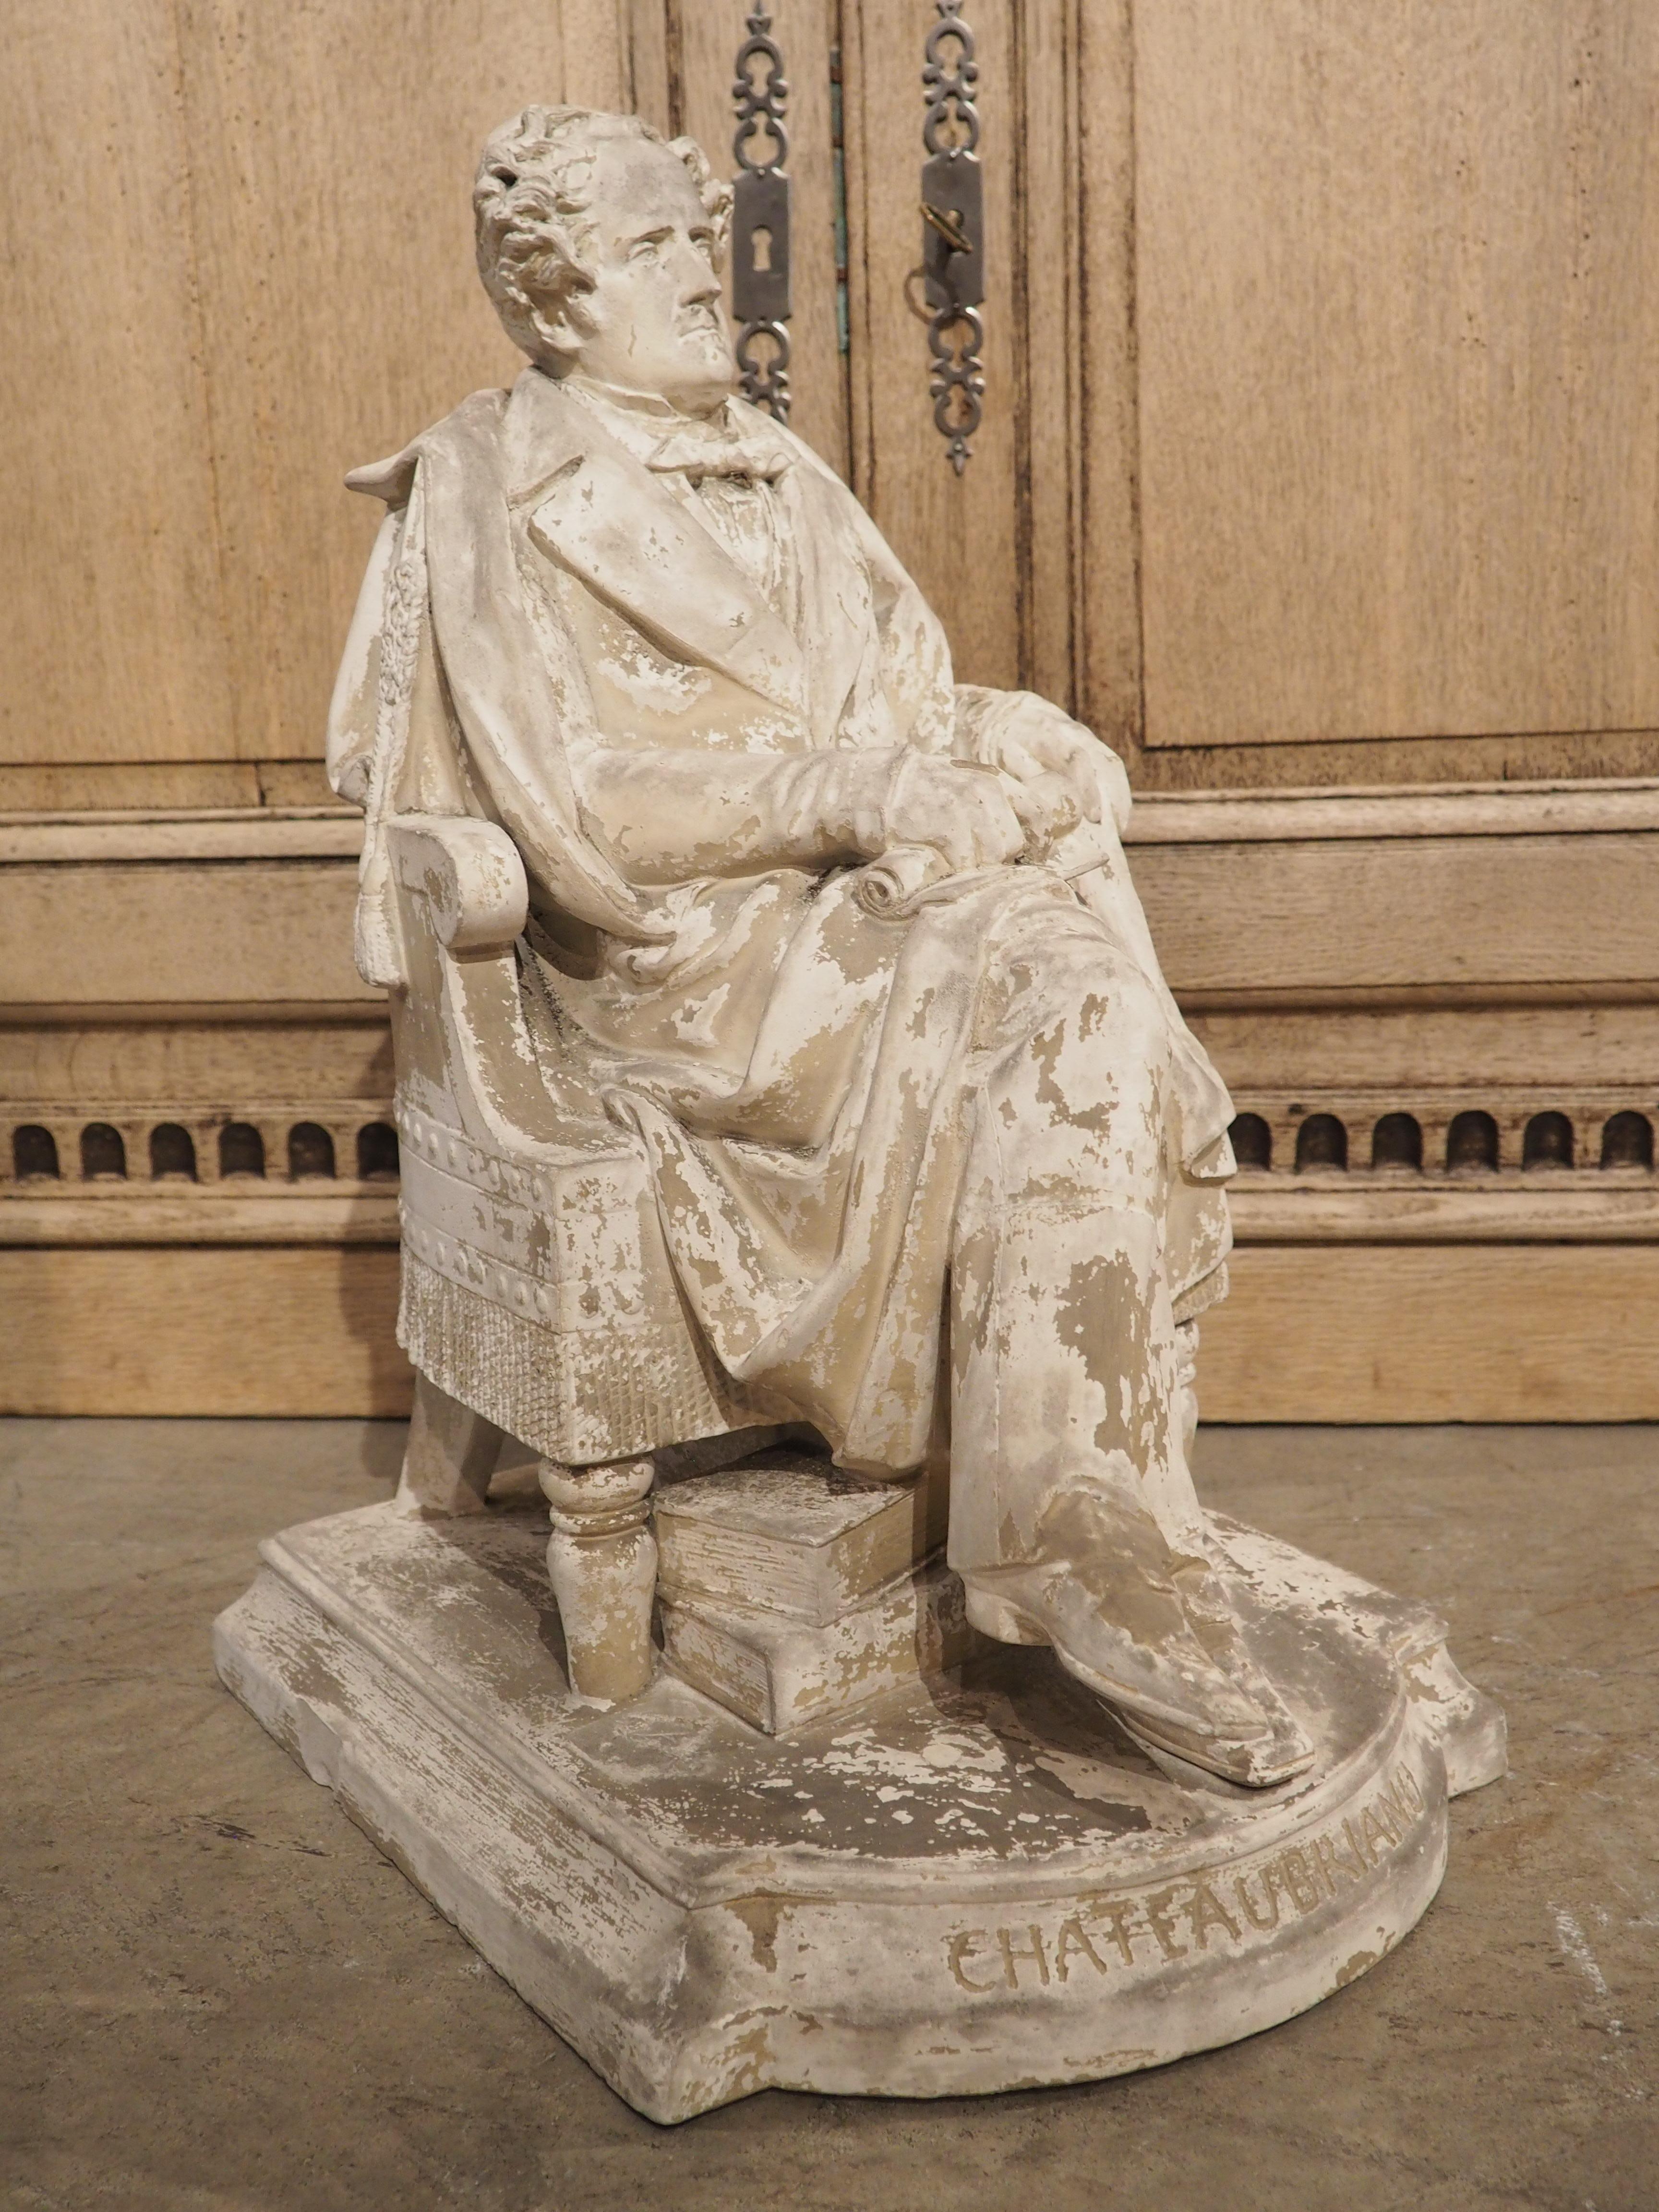 circa 1880 French Plaster Sculpture of Francois Rene De Chateaubriand For Sale 8